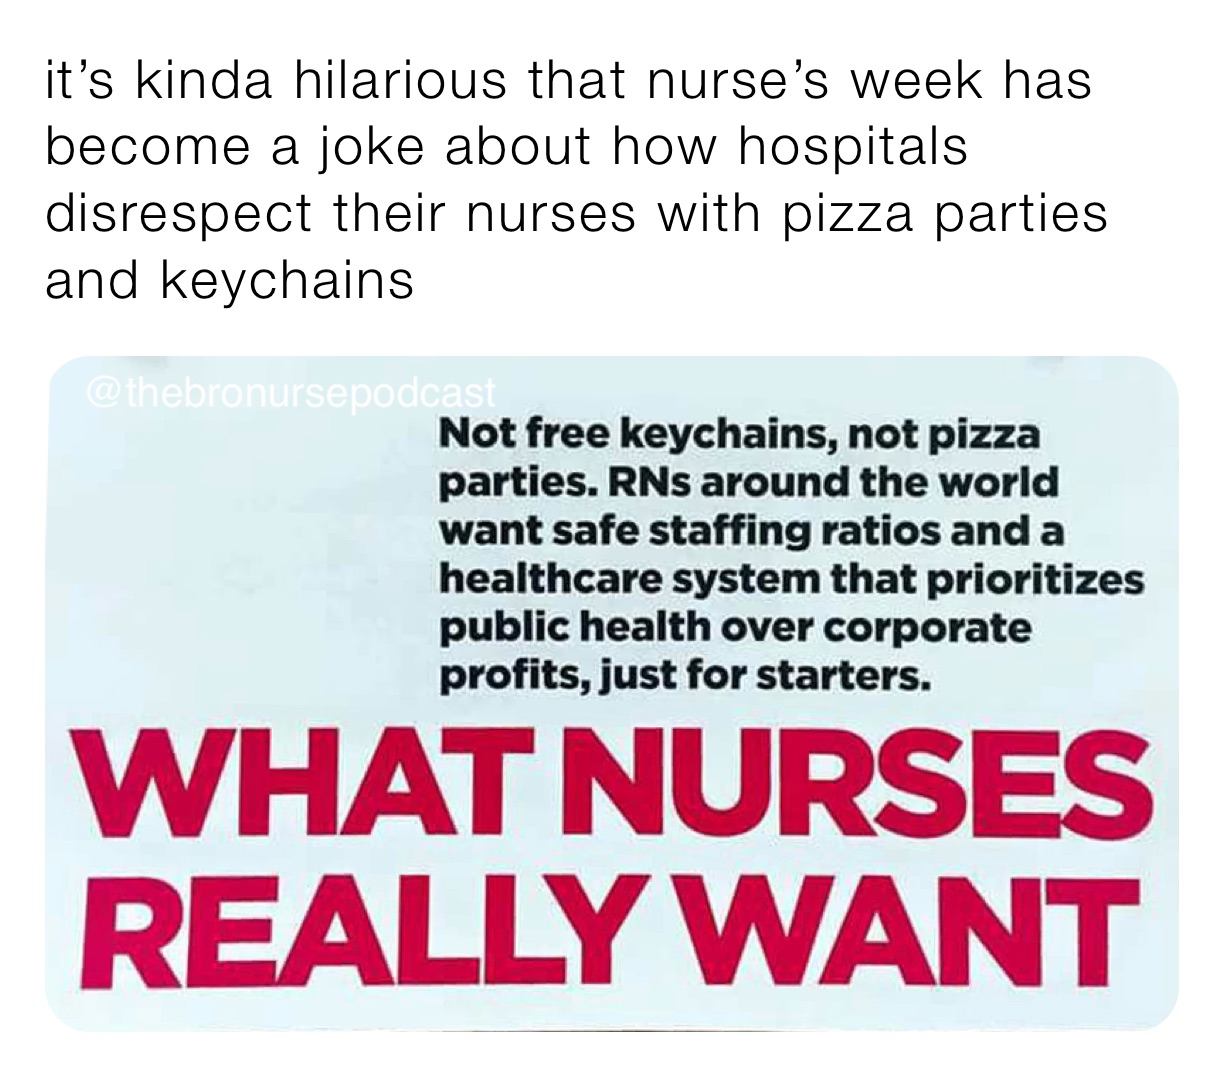 it’s kinda hilarious that nurse’s week has become a joke about how hospitals disrespect their nurses with pizza parties and keychains 